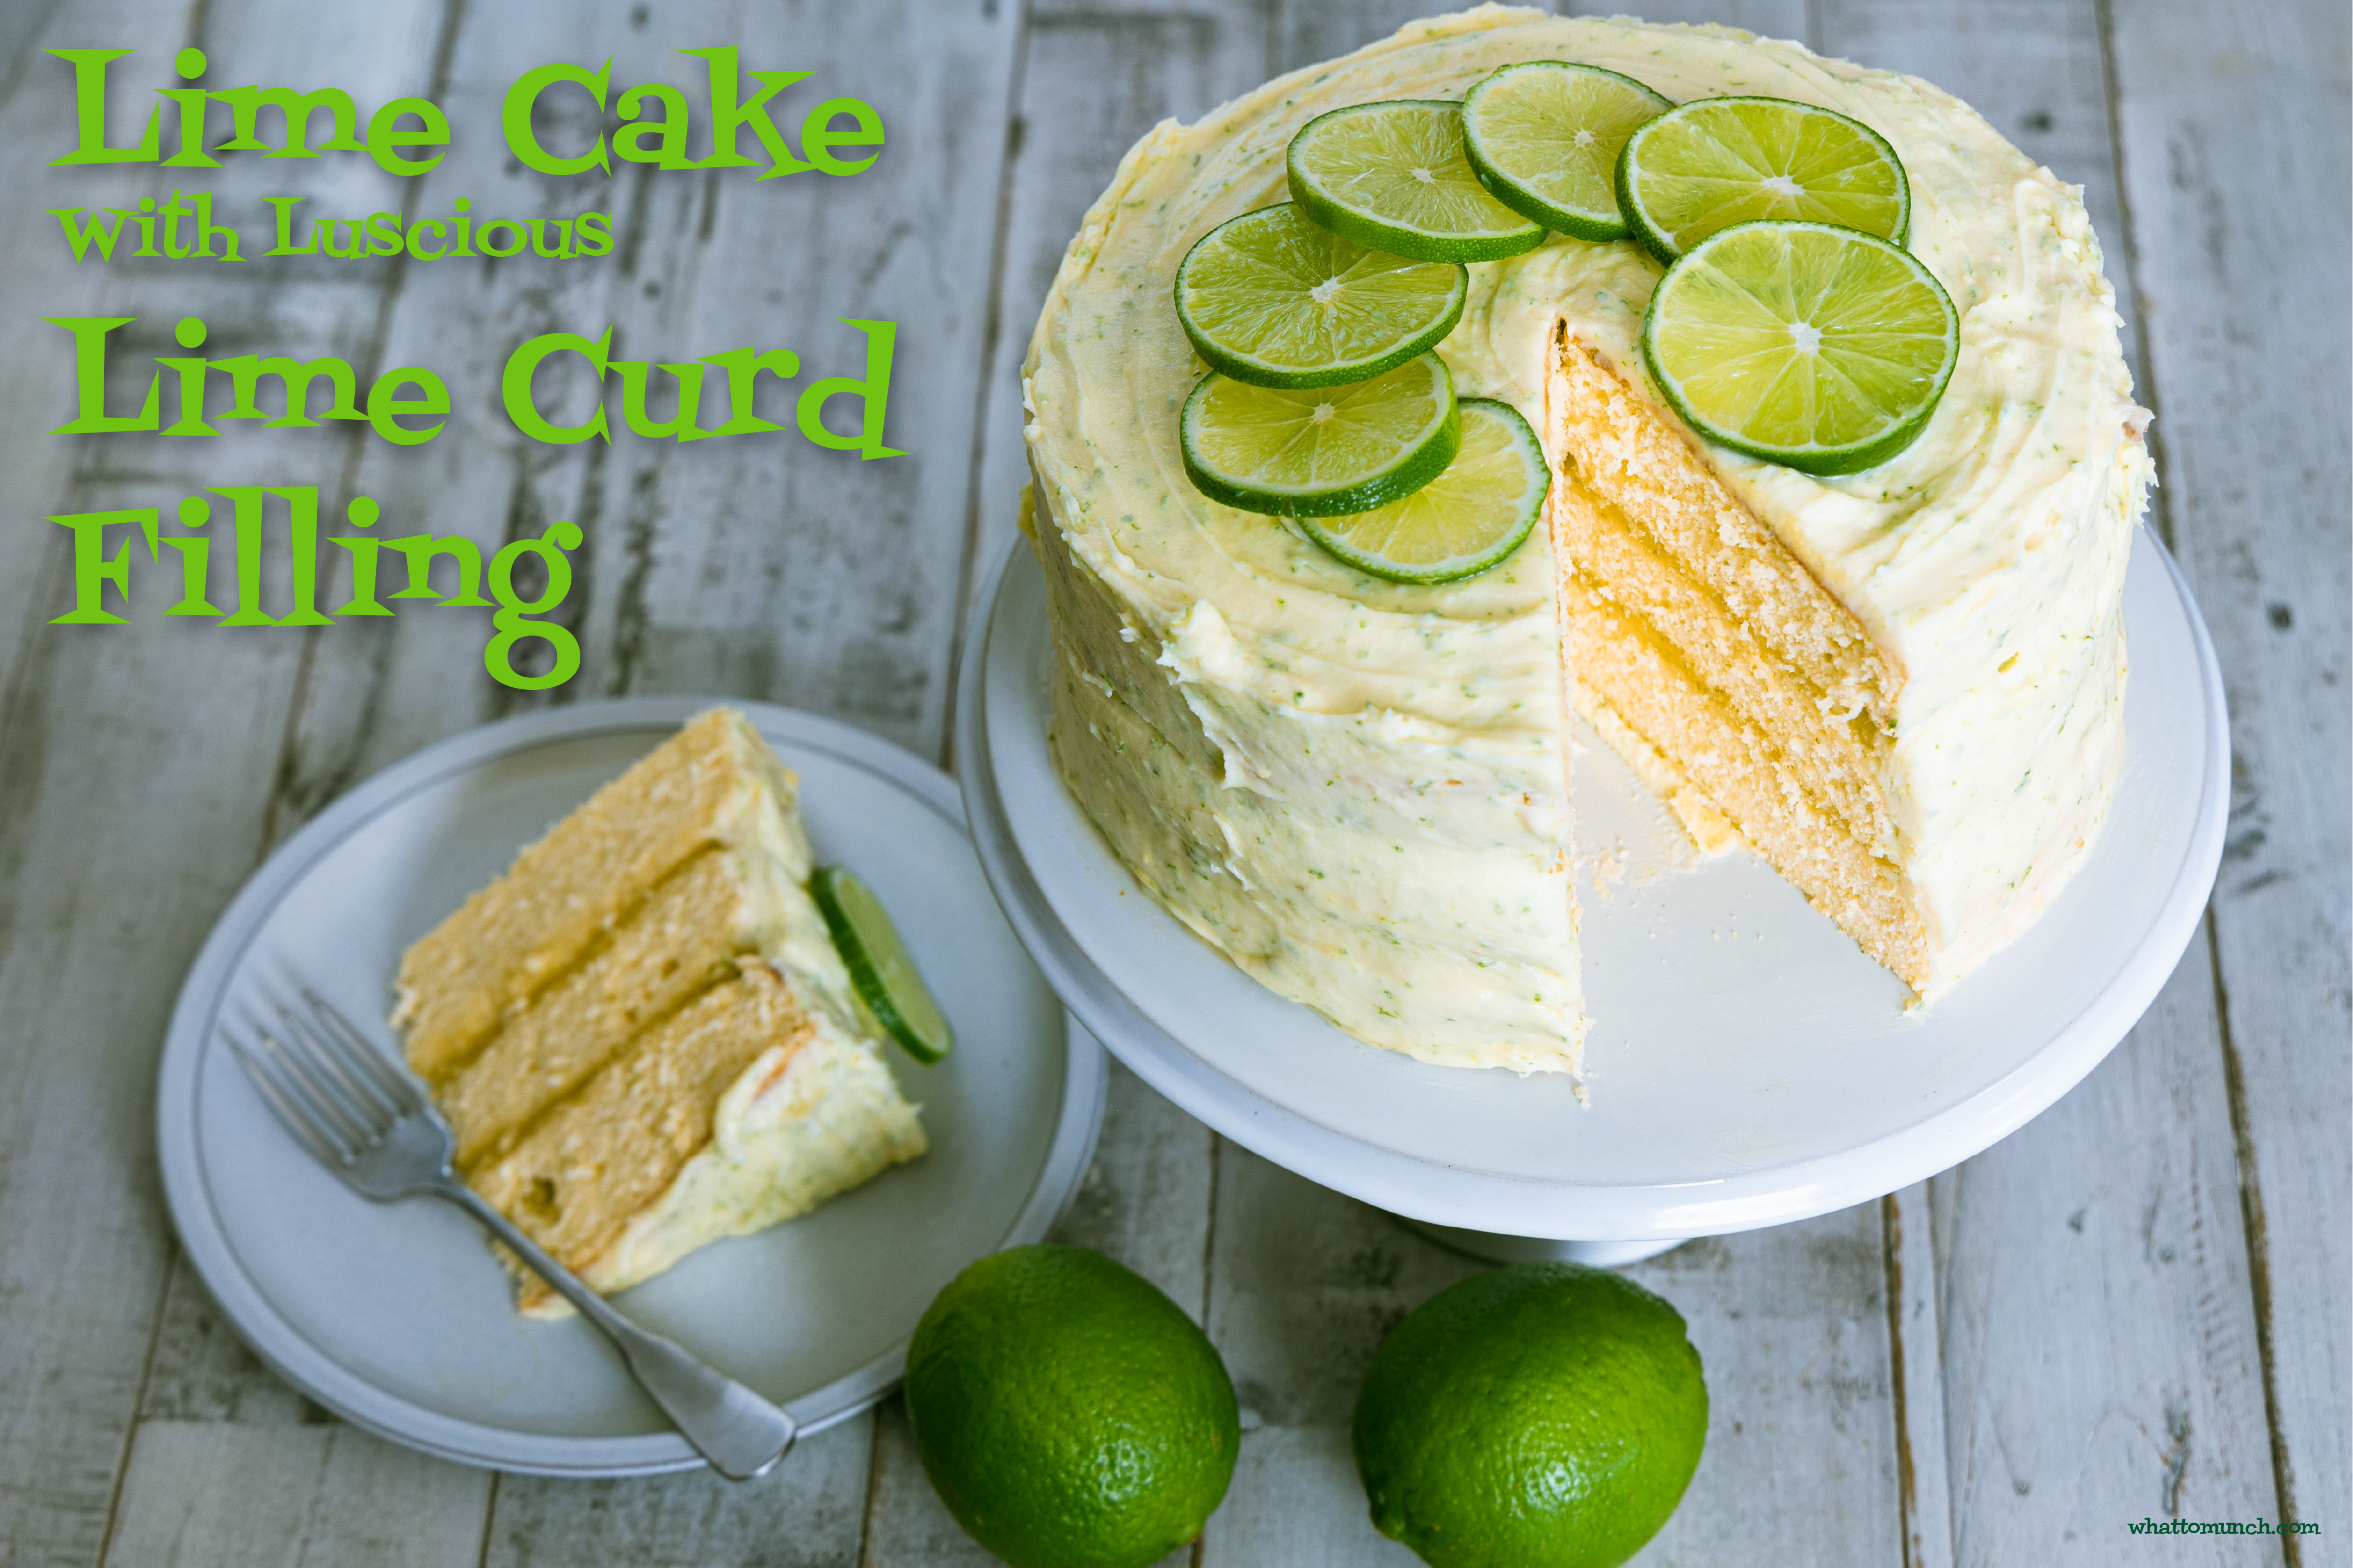 Lime Cake with Luscious Lime Curd Filling